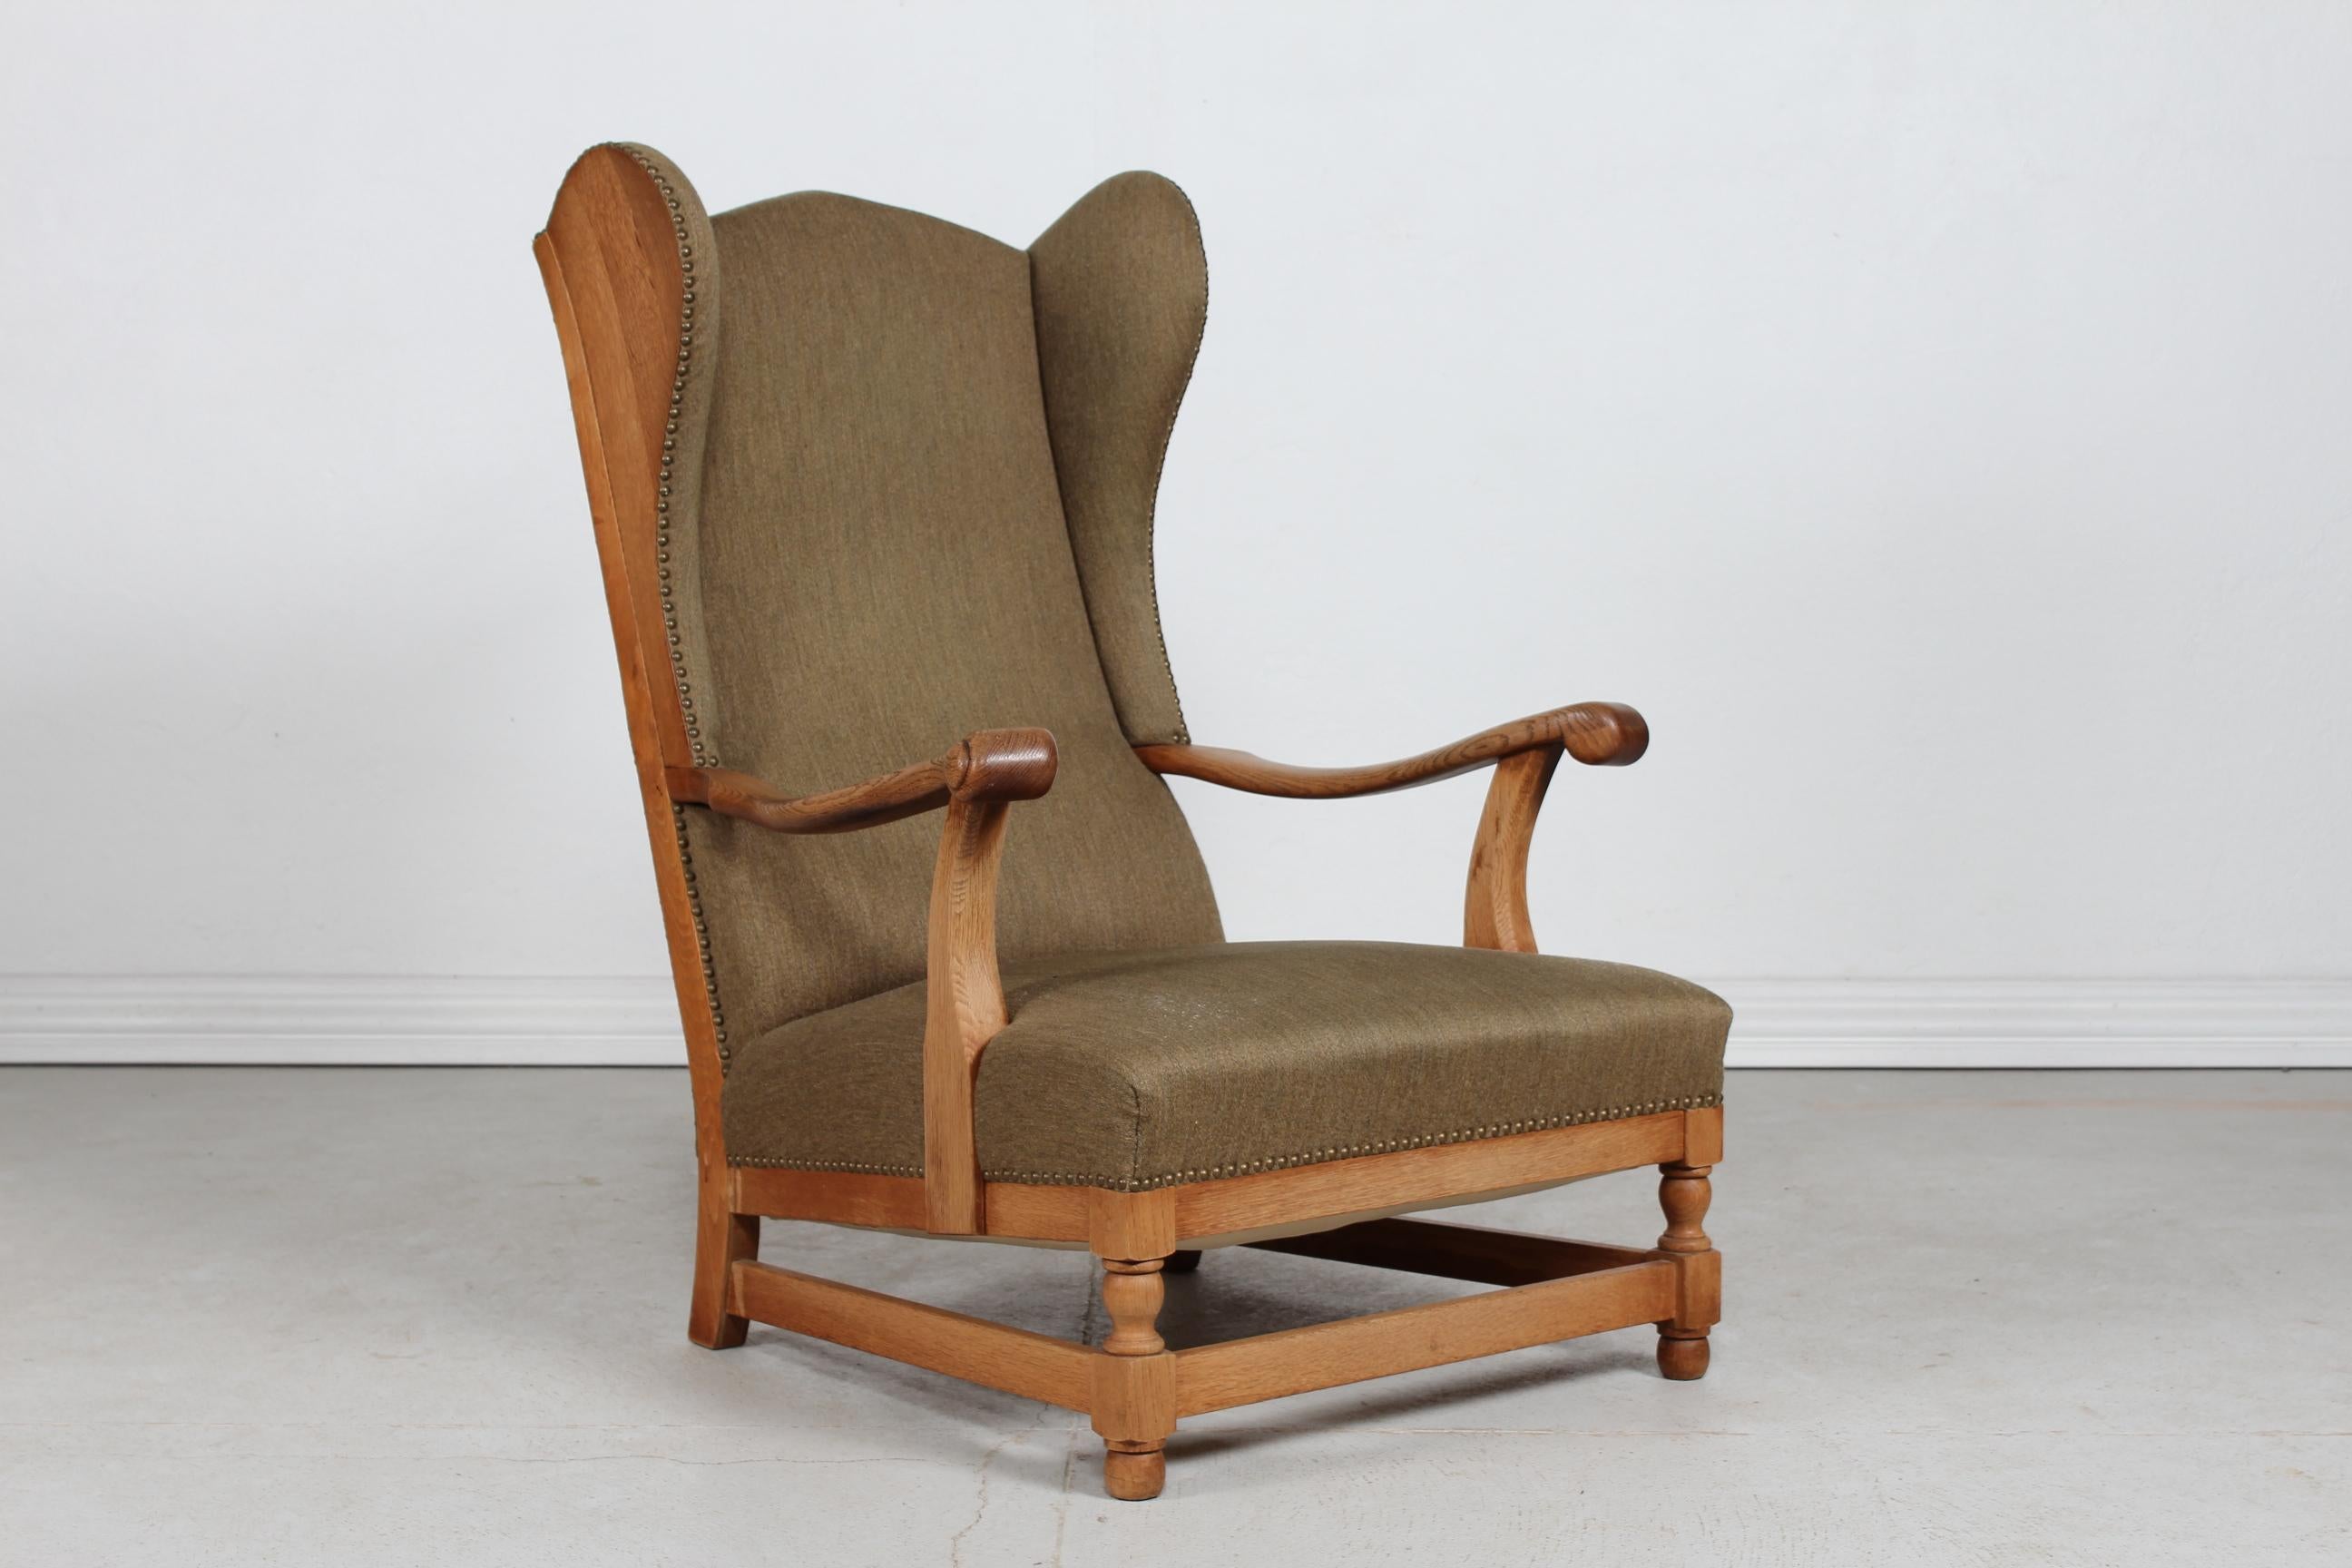 Stunning Highback King Chair of Solid Oak with Greenish Wool Denmark 1930-40 For Sale 7